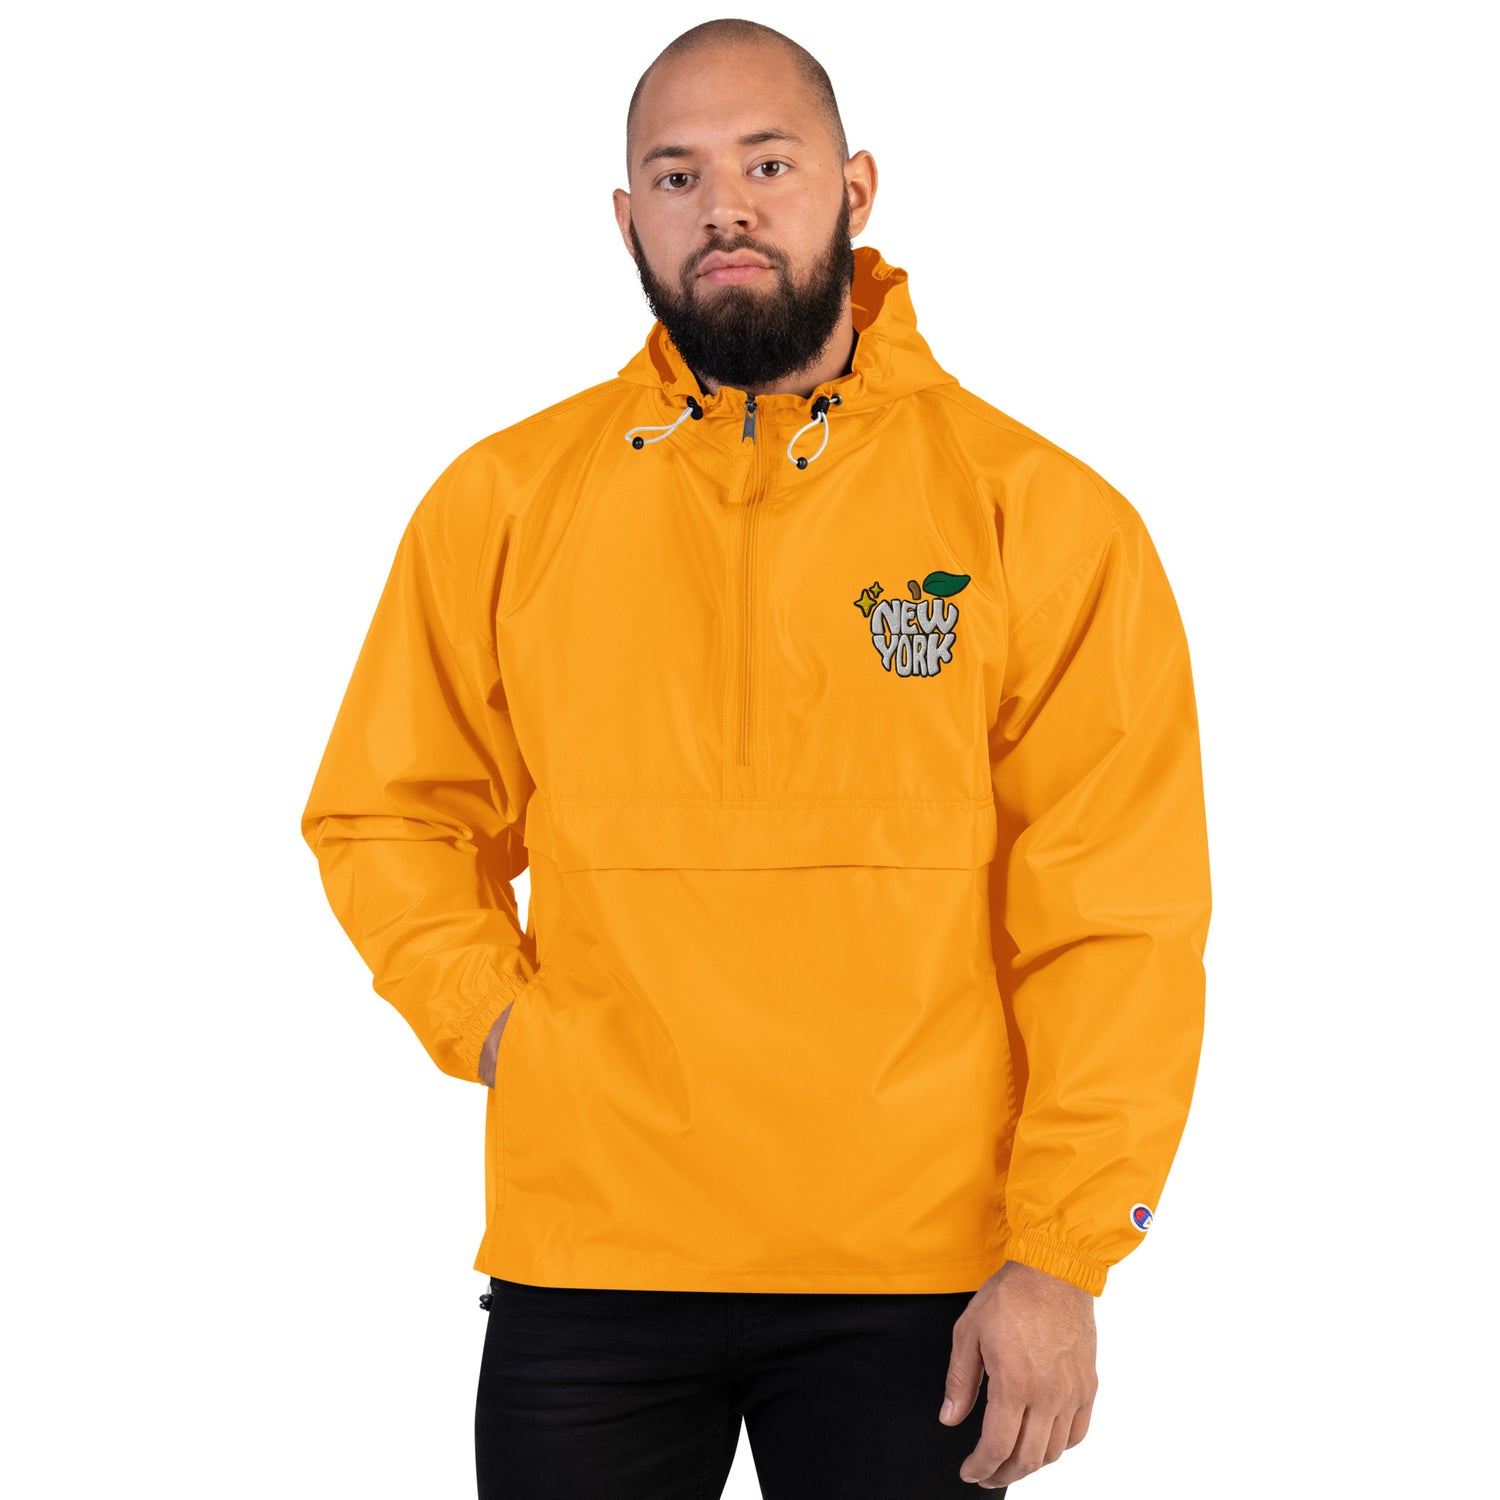 New York Apple Logo Embroidered Yellow Champion Packable Windbreaker Jacket Scattered Streetwear